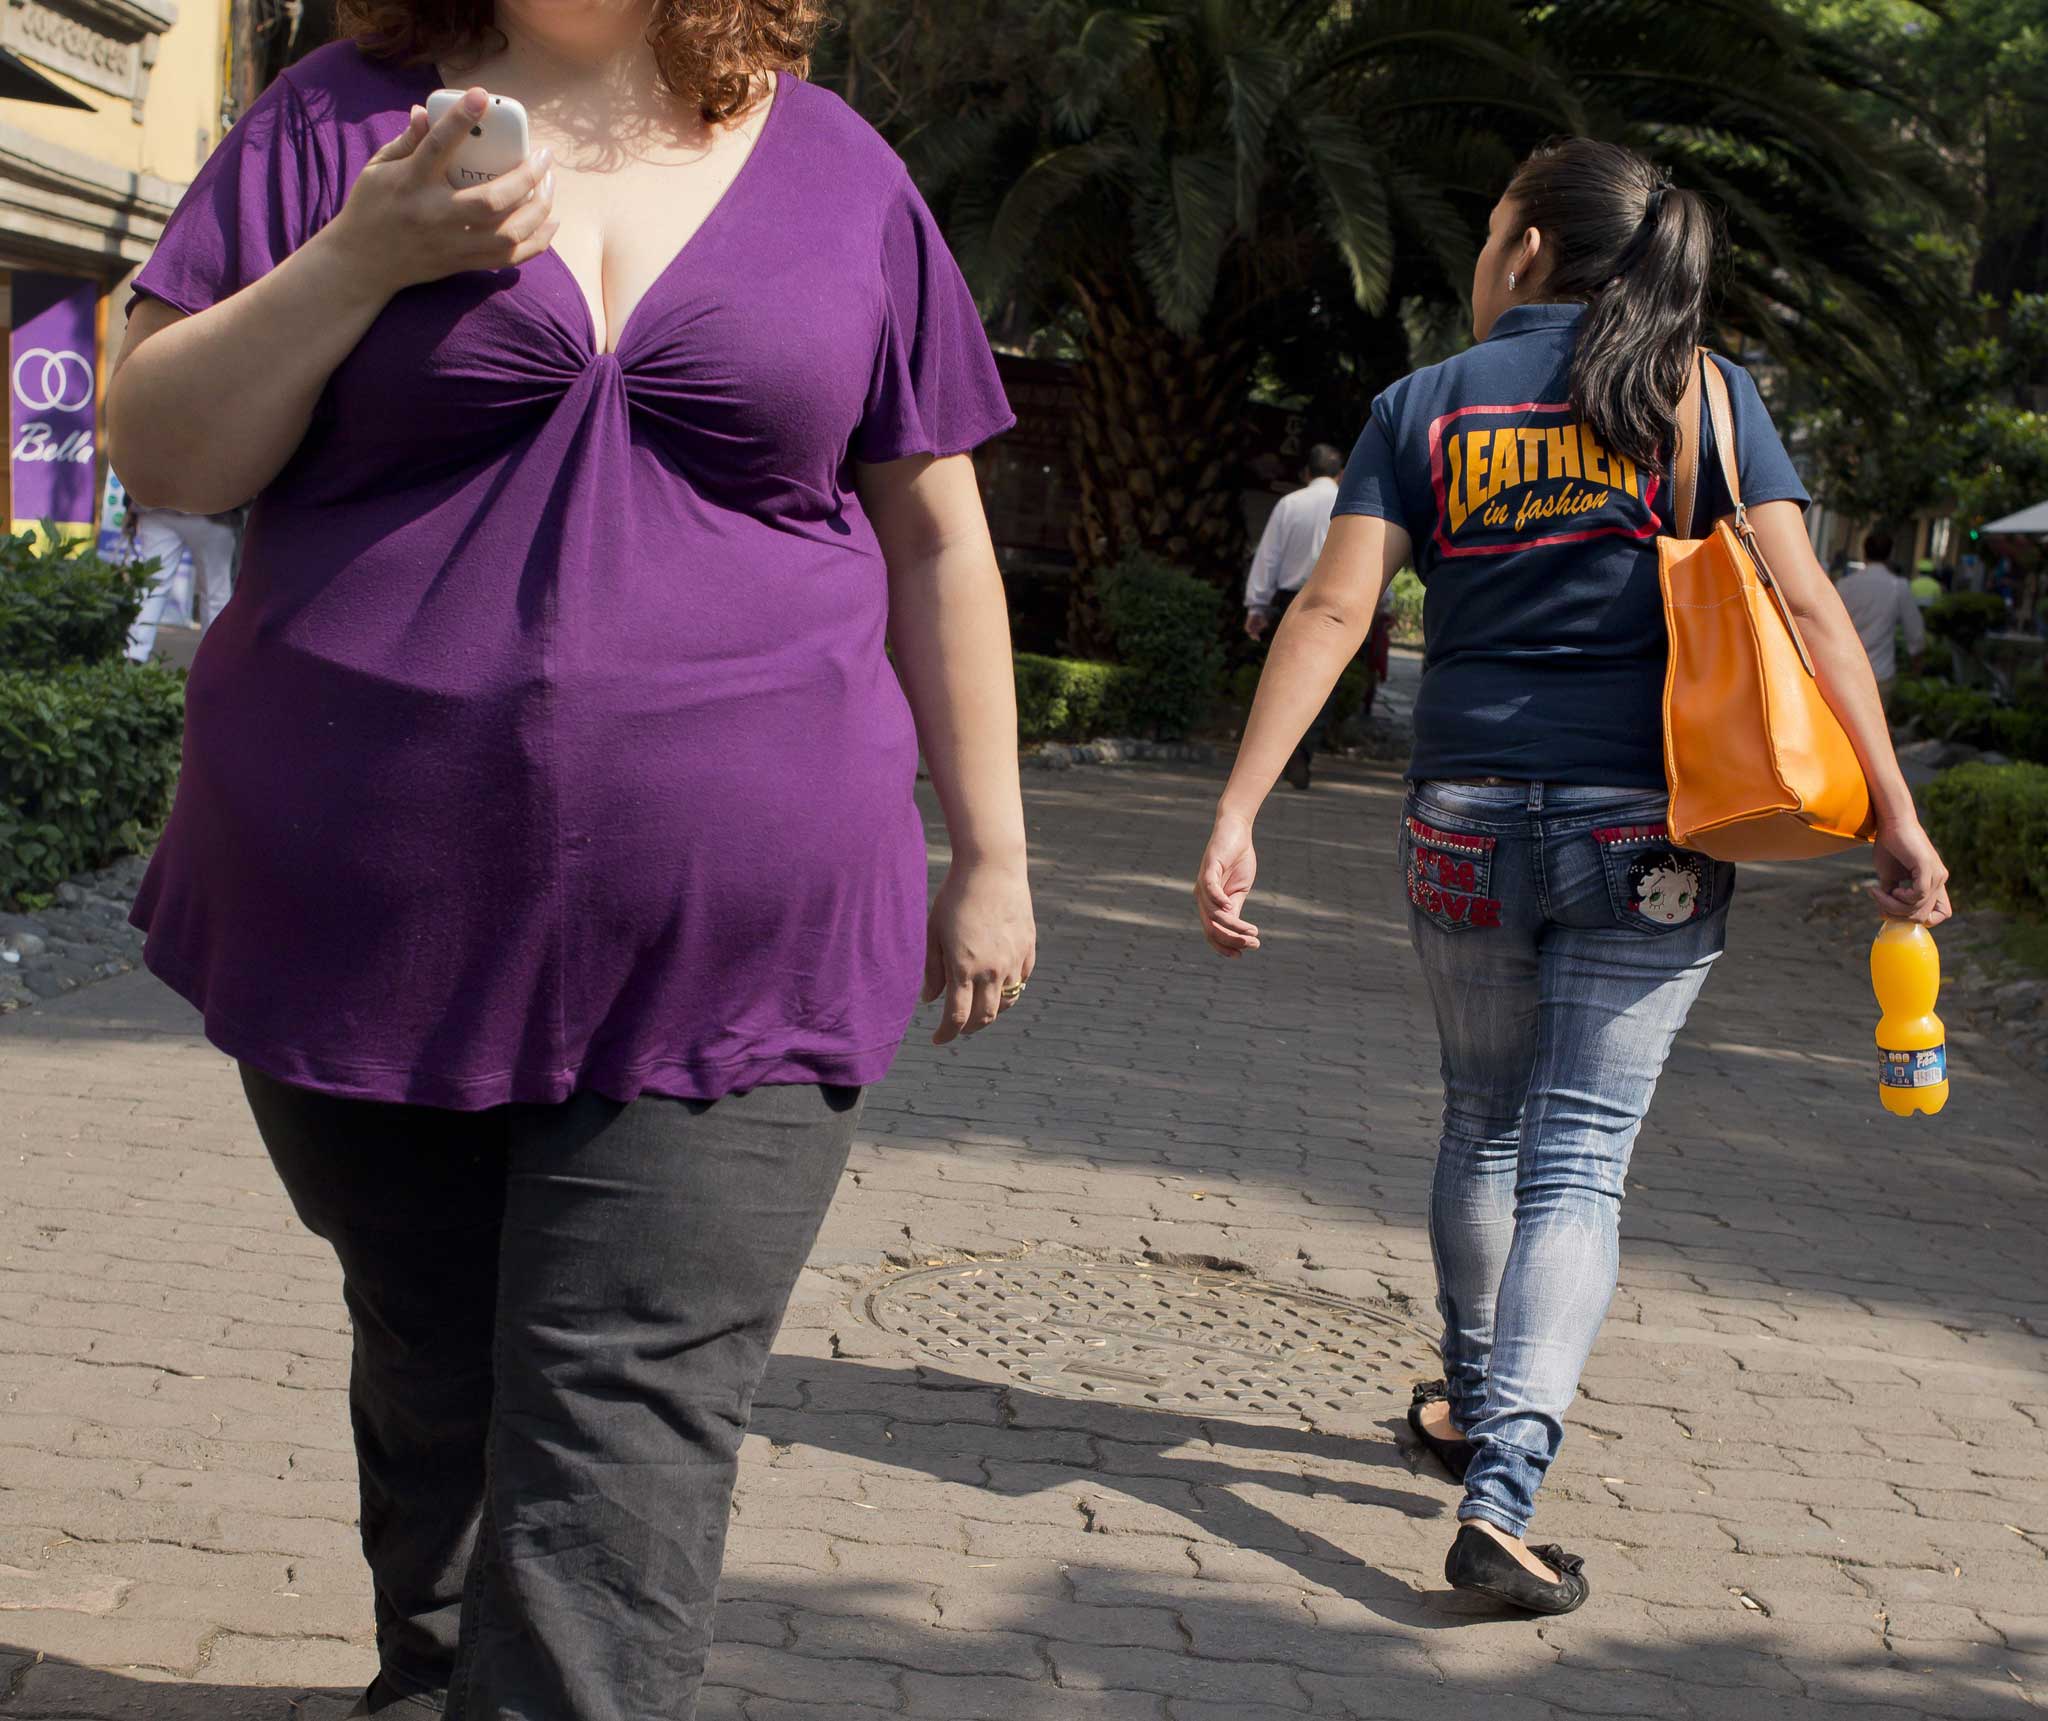 Overweight mothers are more likely to underestimate their children’s size, a new study examining perceptions of obesity has found